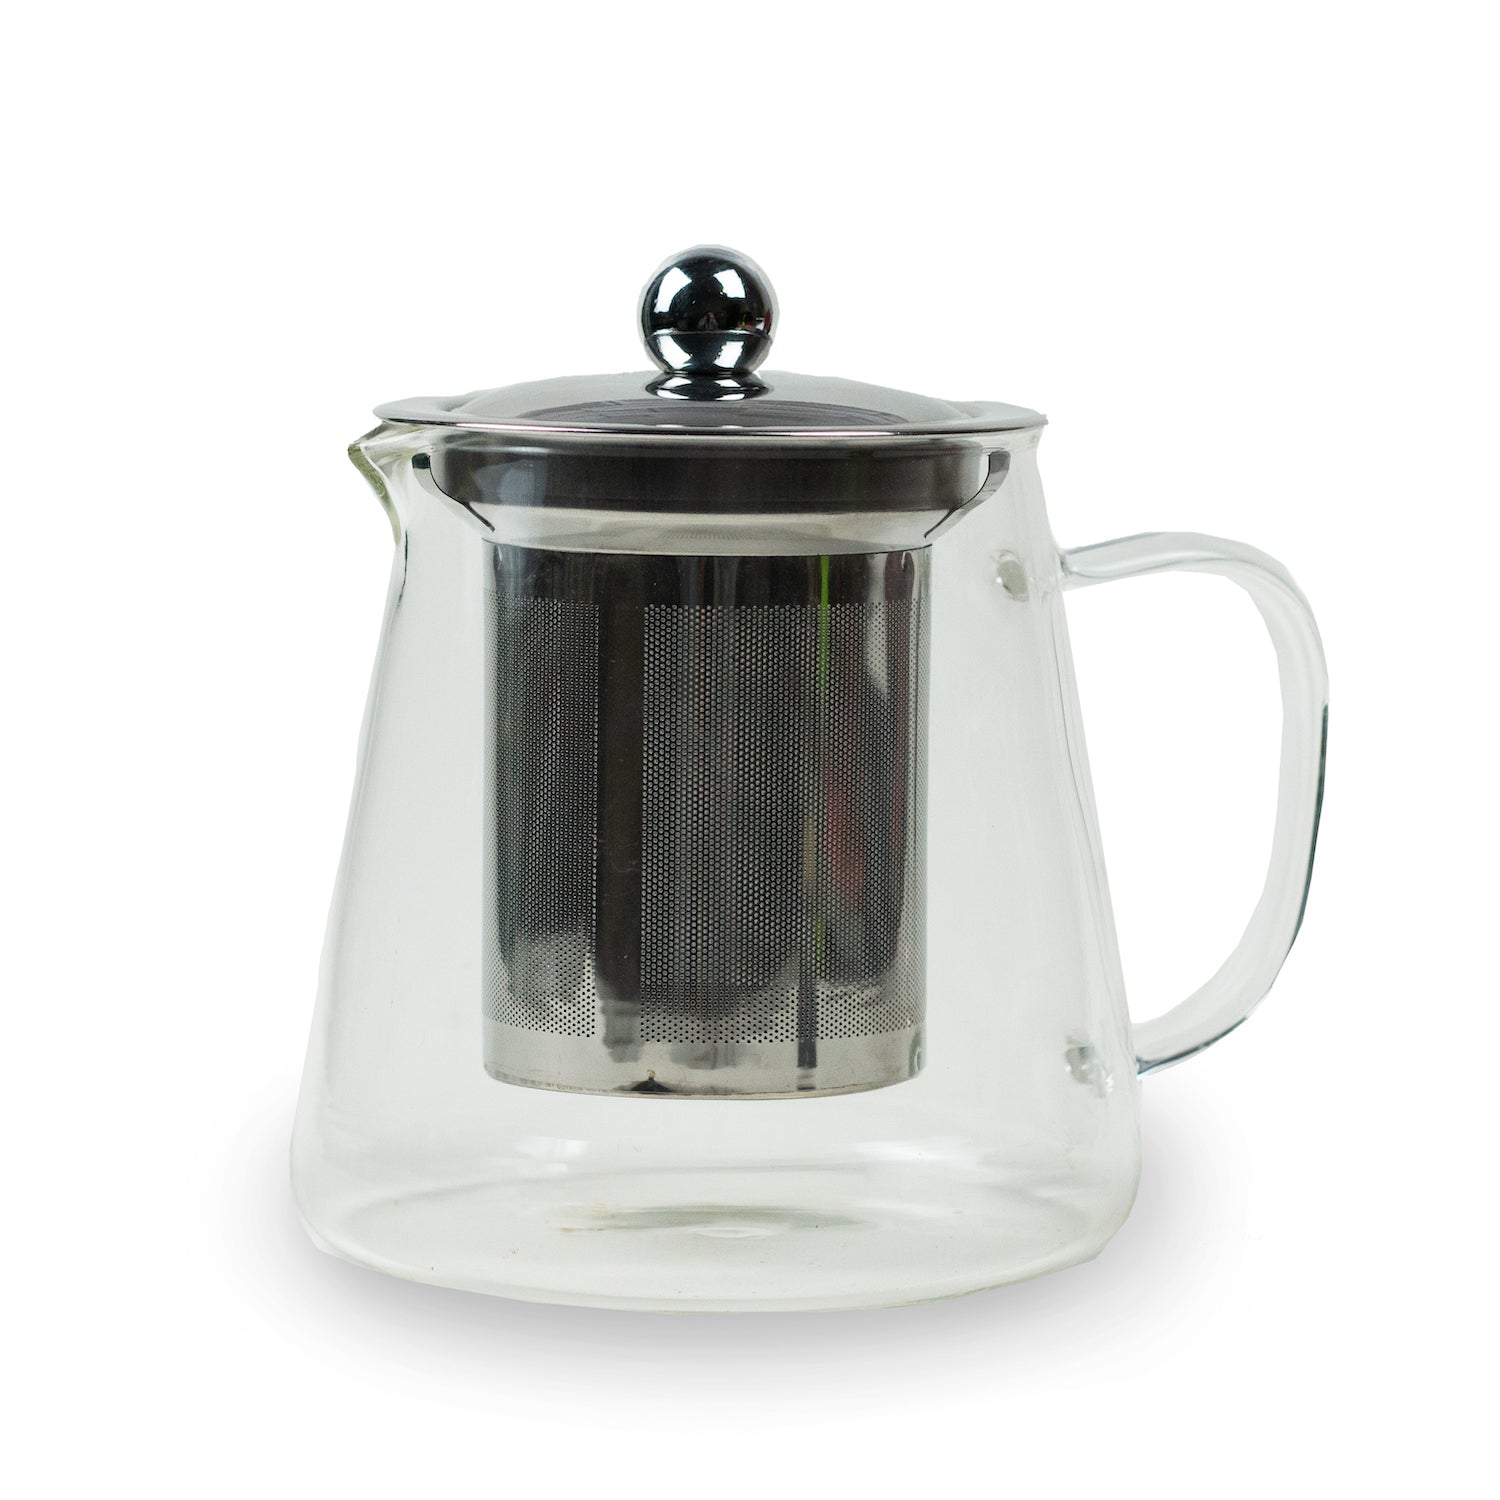 Best Glass Tea Kettle With Infuser